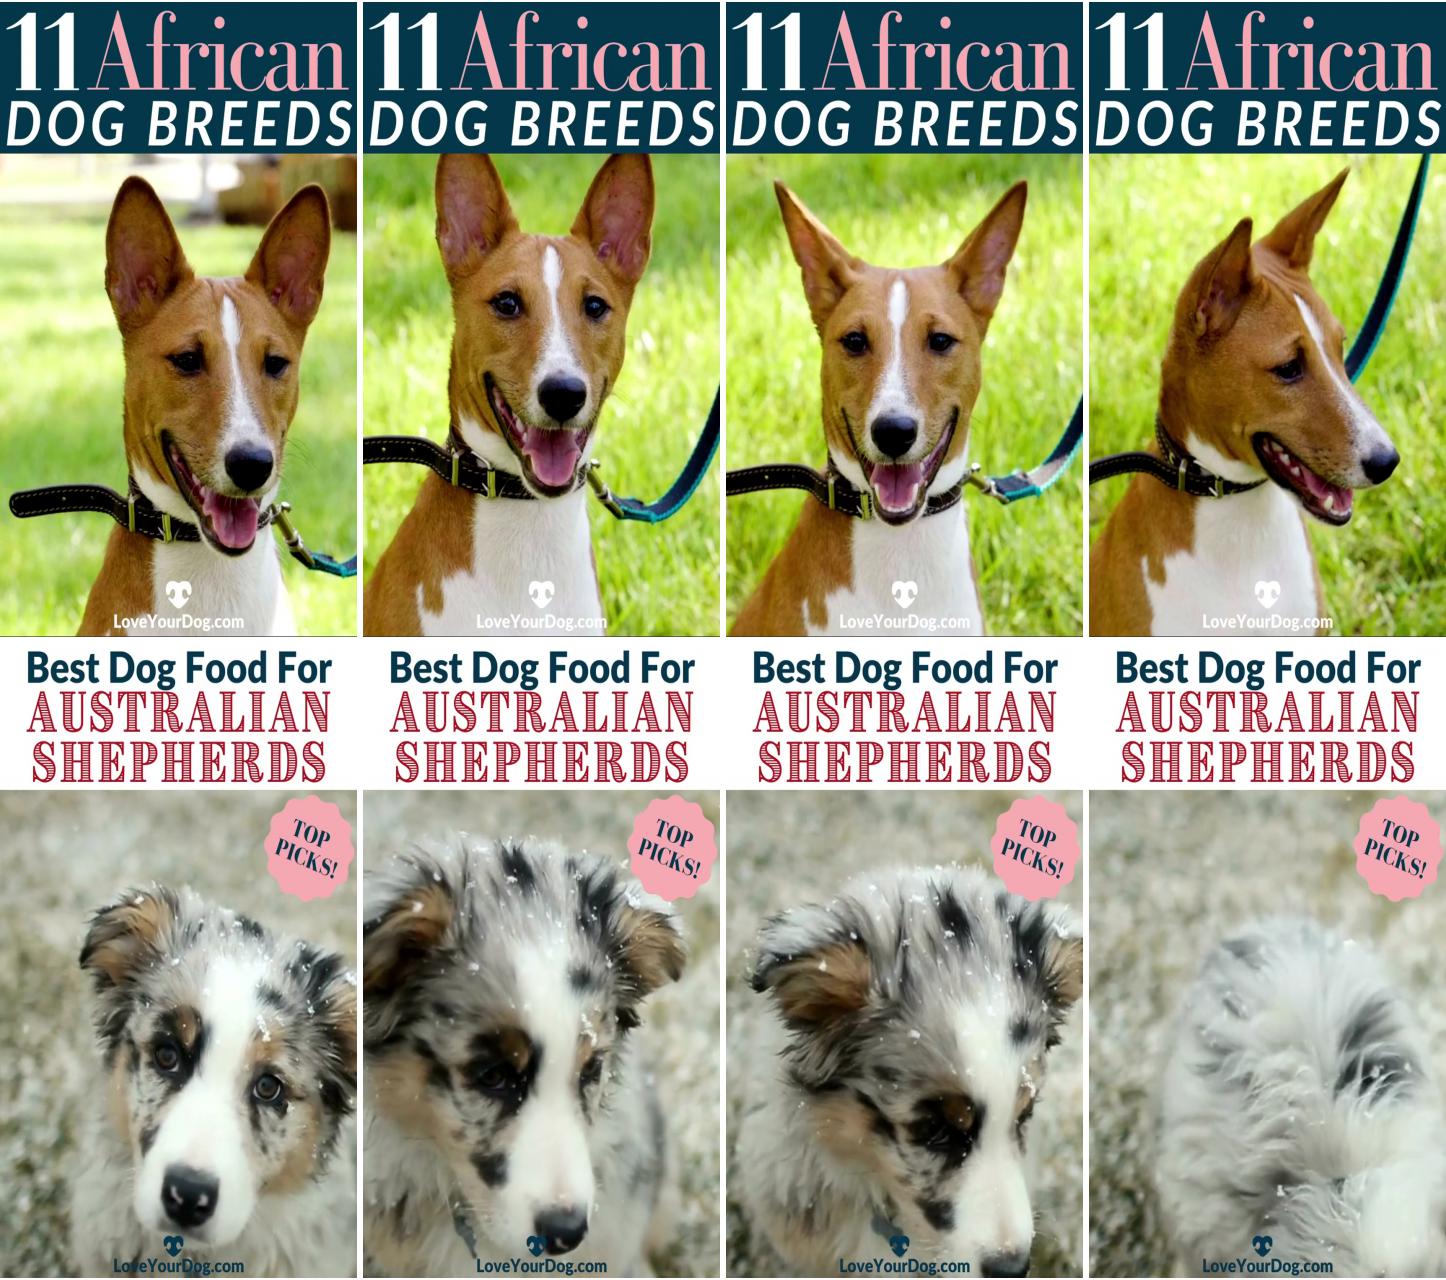 African dog breeds: 11 canines that come from africa; best dog foods for australian shepherds: puppies, adults and seniors